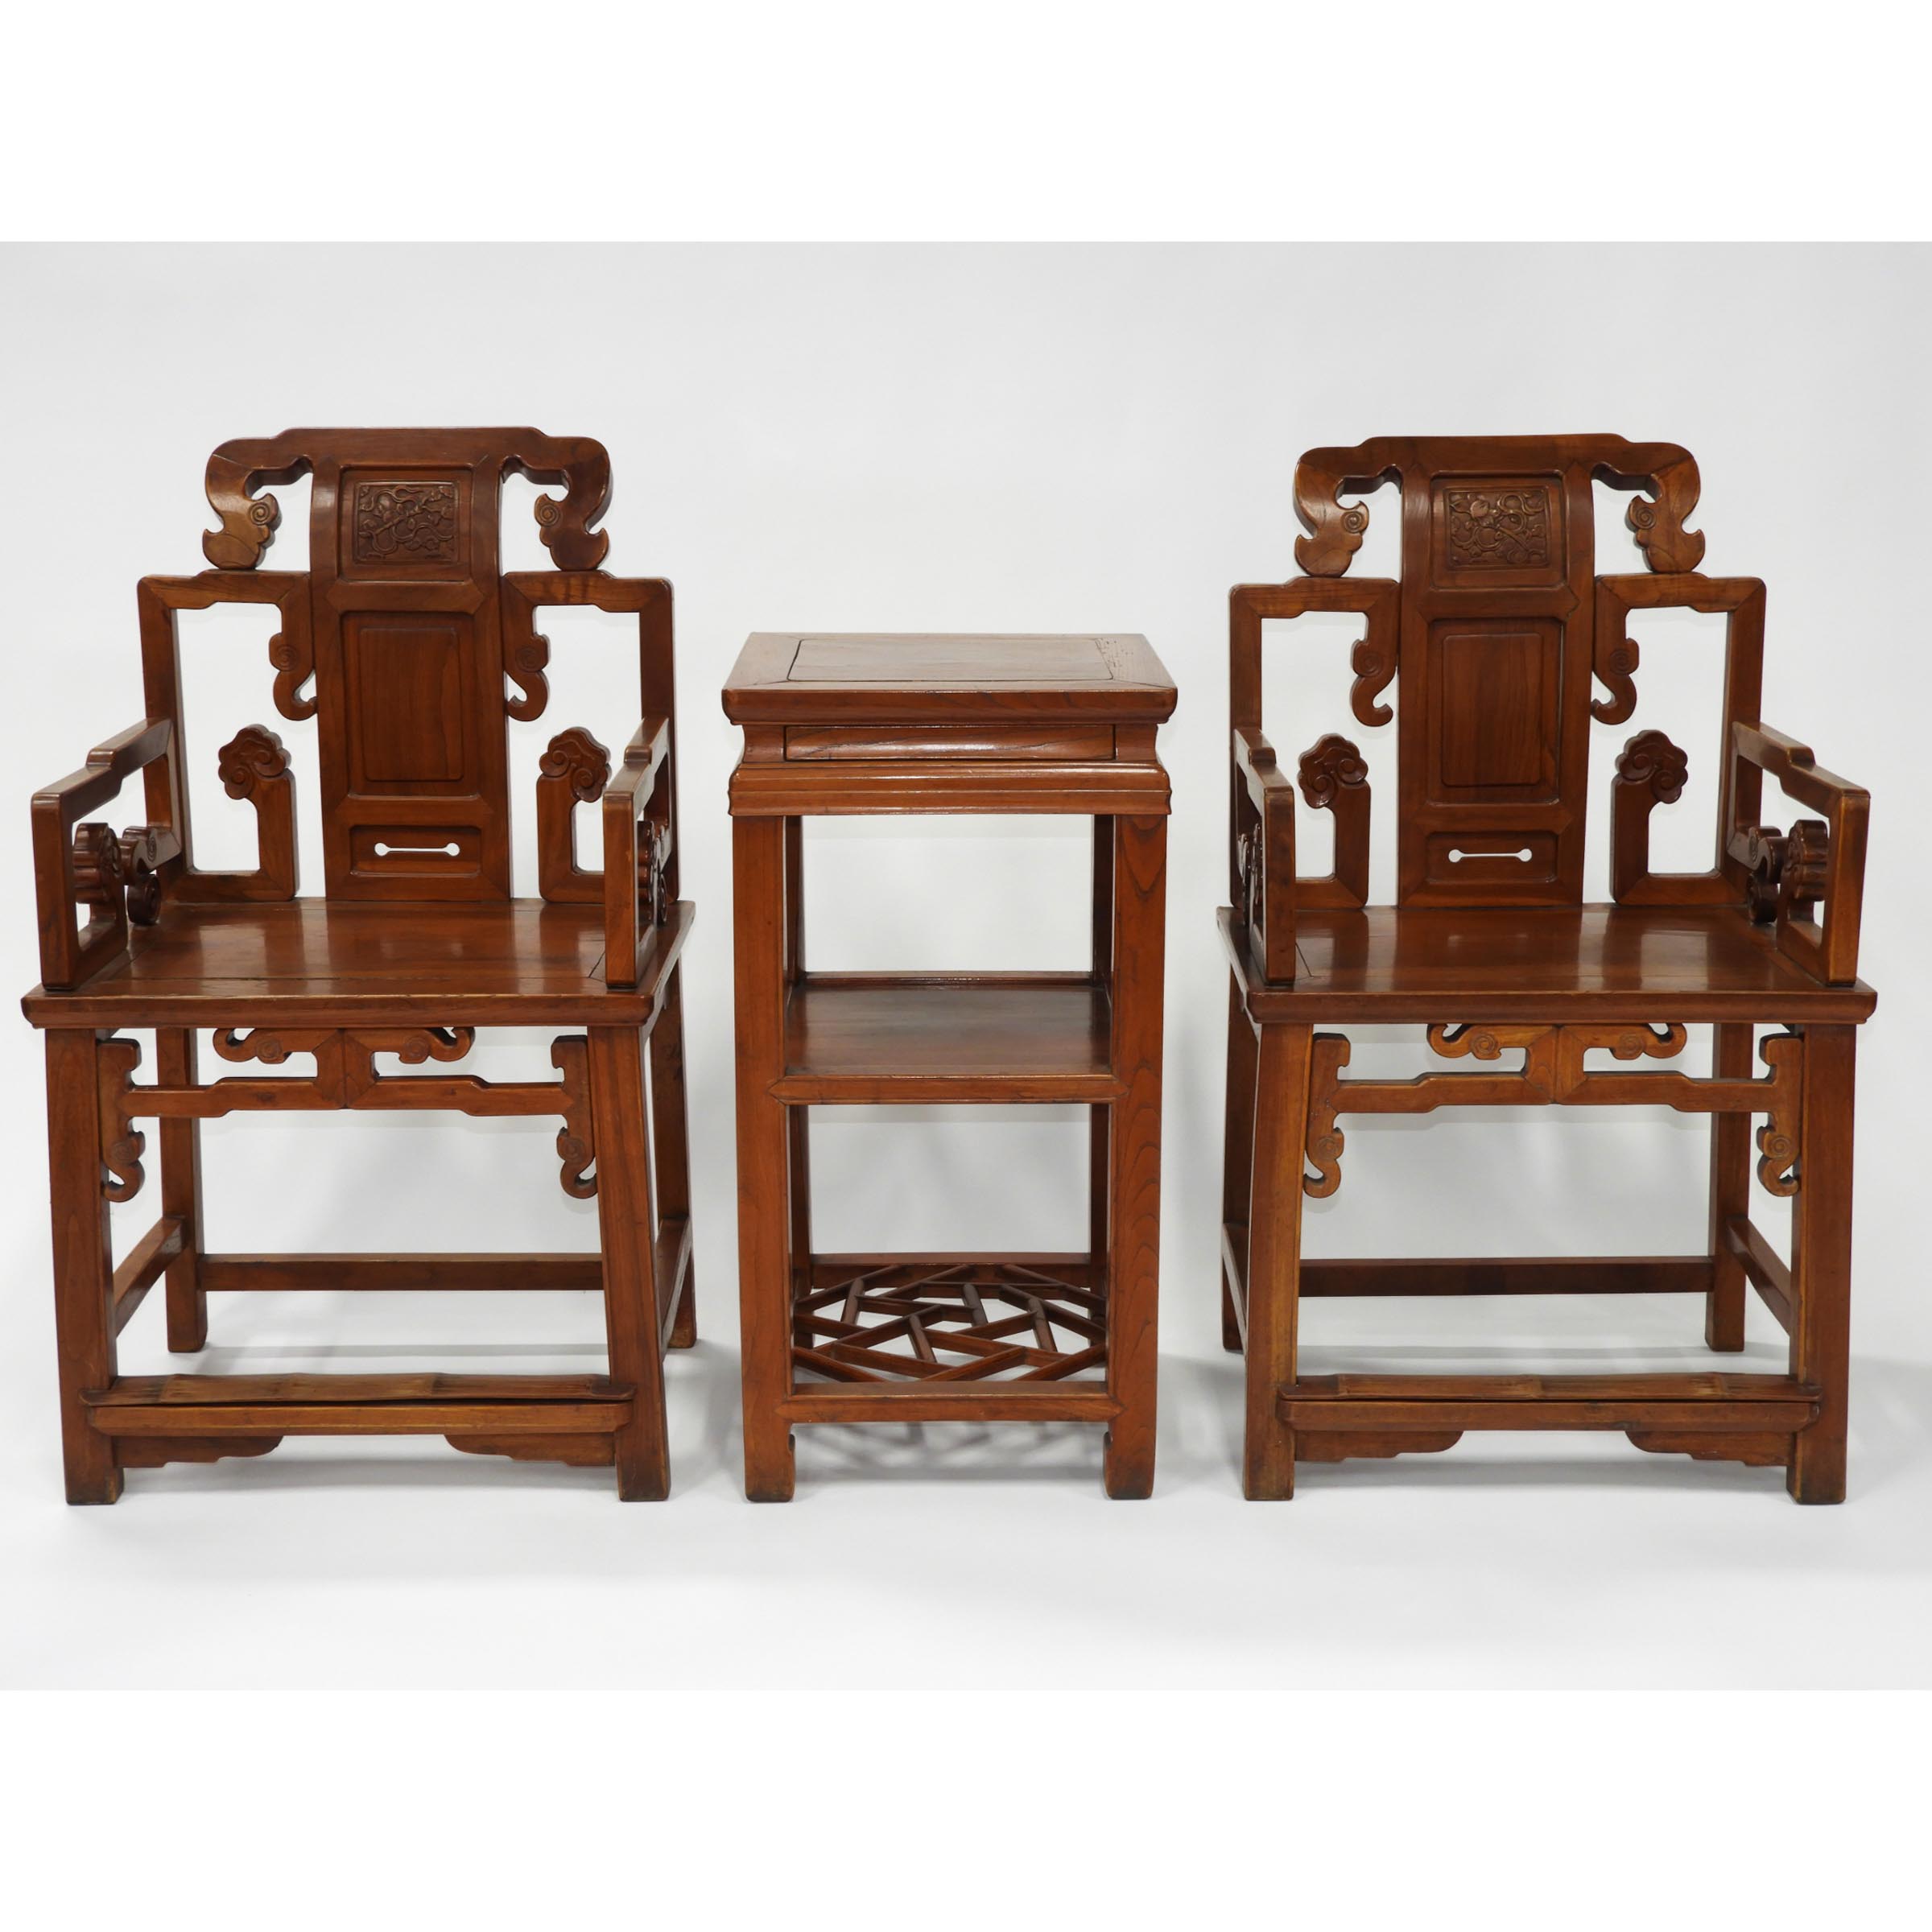 A Chinese Hardwood Table and Two Chairs